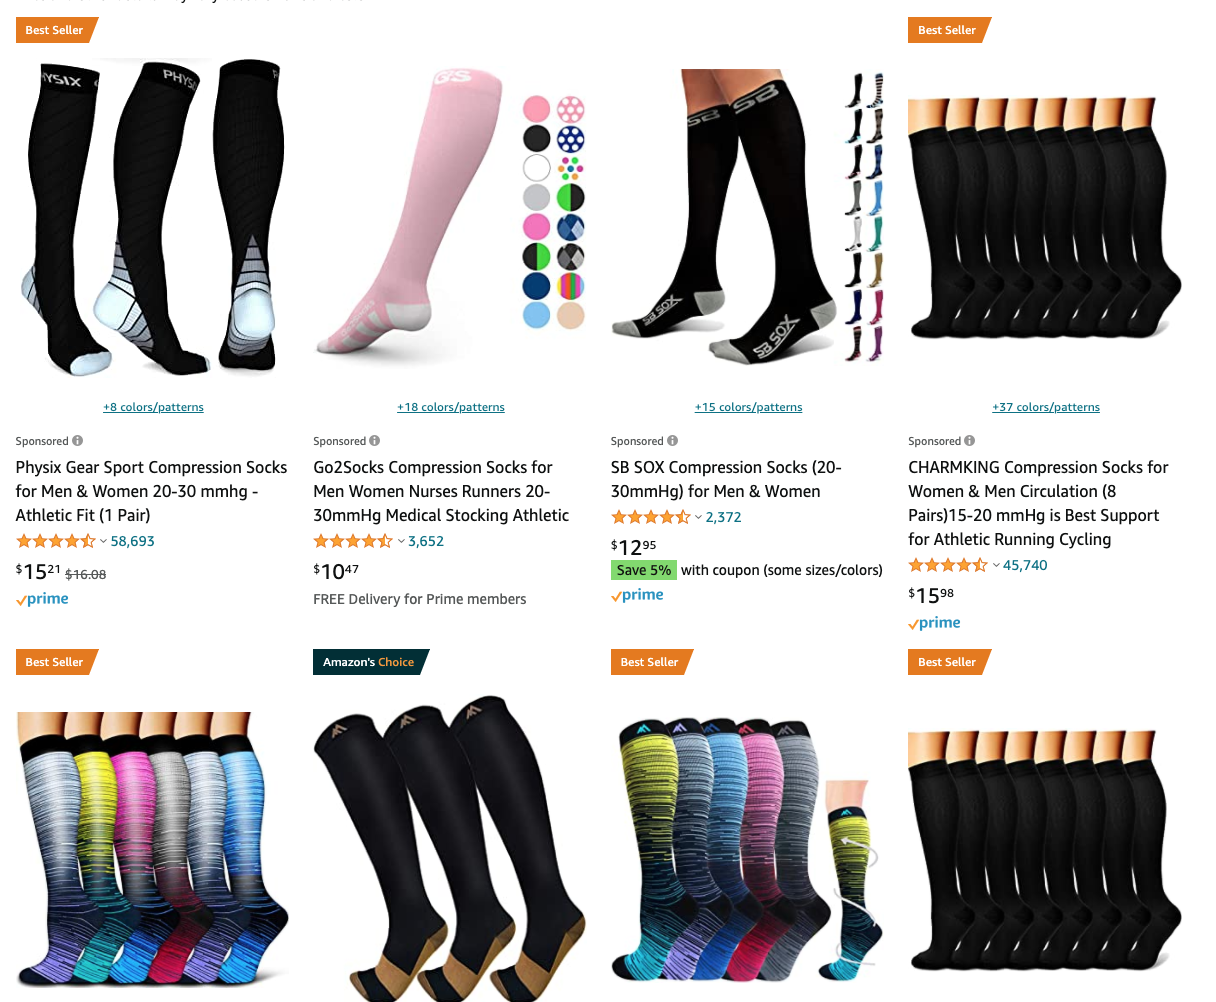 Compression socks for sale on Amazon